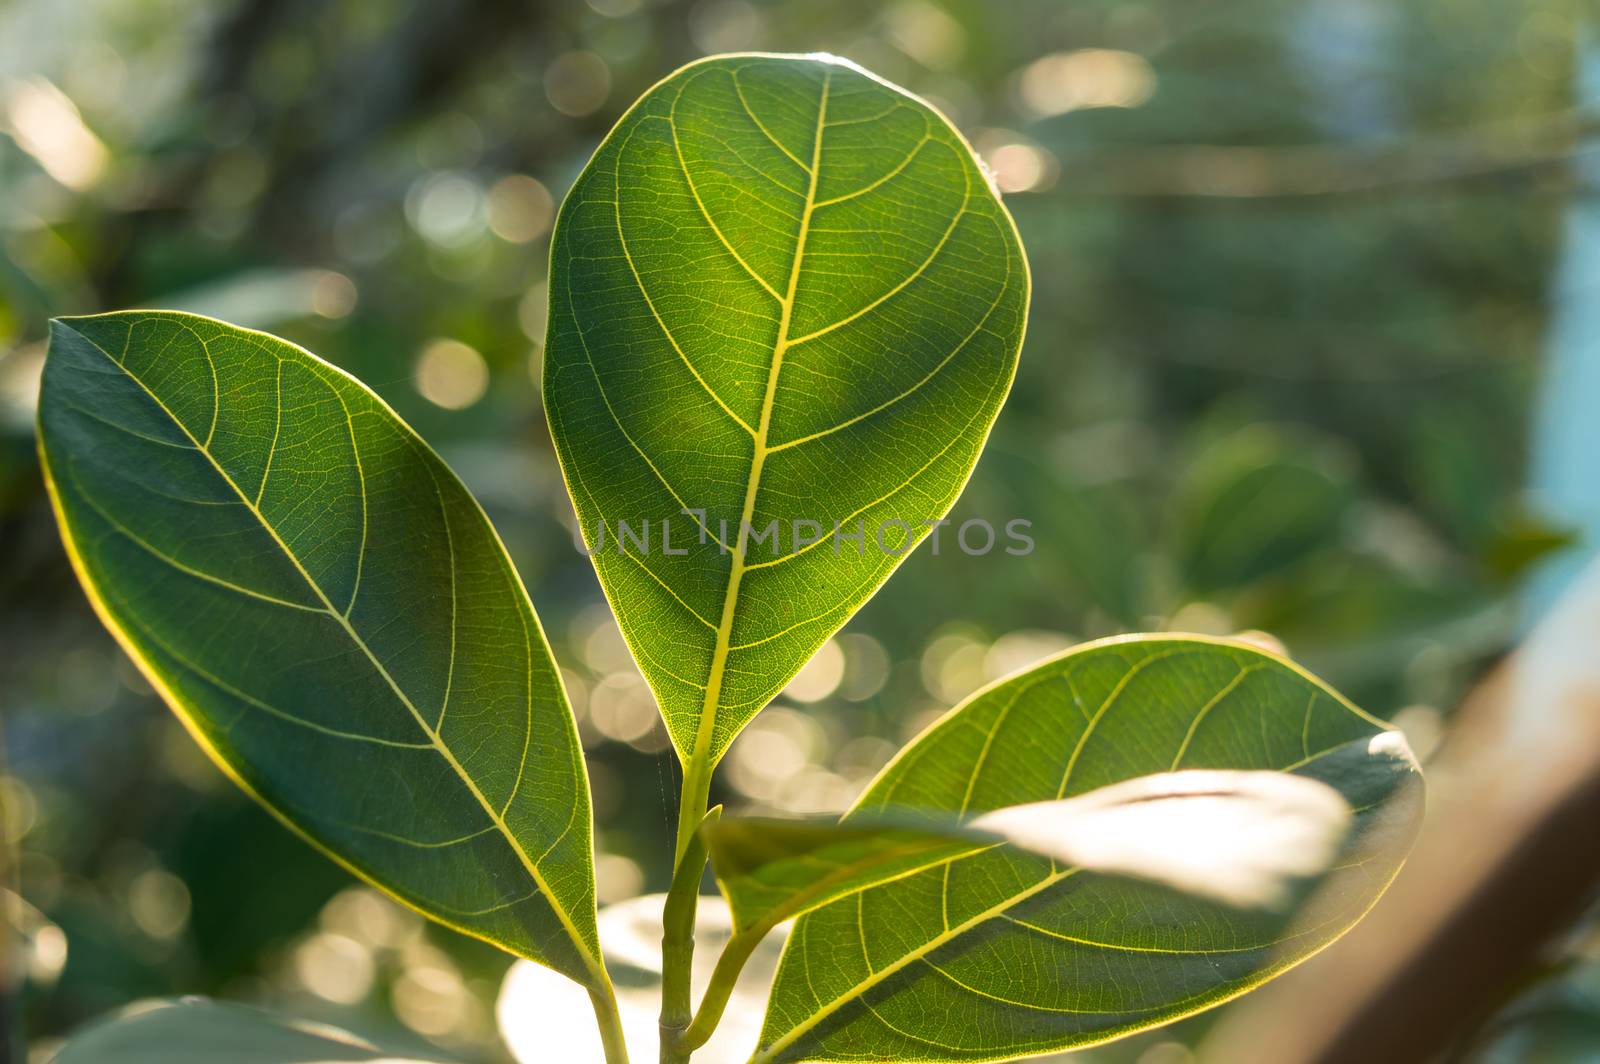 Green leaf absorbs morning sunlight. Leaves of a plant close-up with back-lit morning ray of light. Beauty in Nature background. Photosynthesis chlorophyll Botany Biology Concept. by sudiptabhowmick